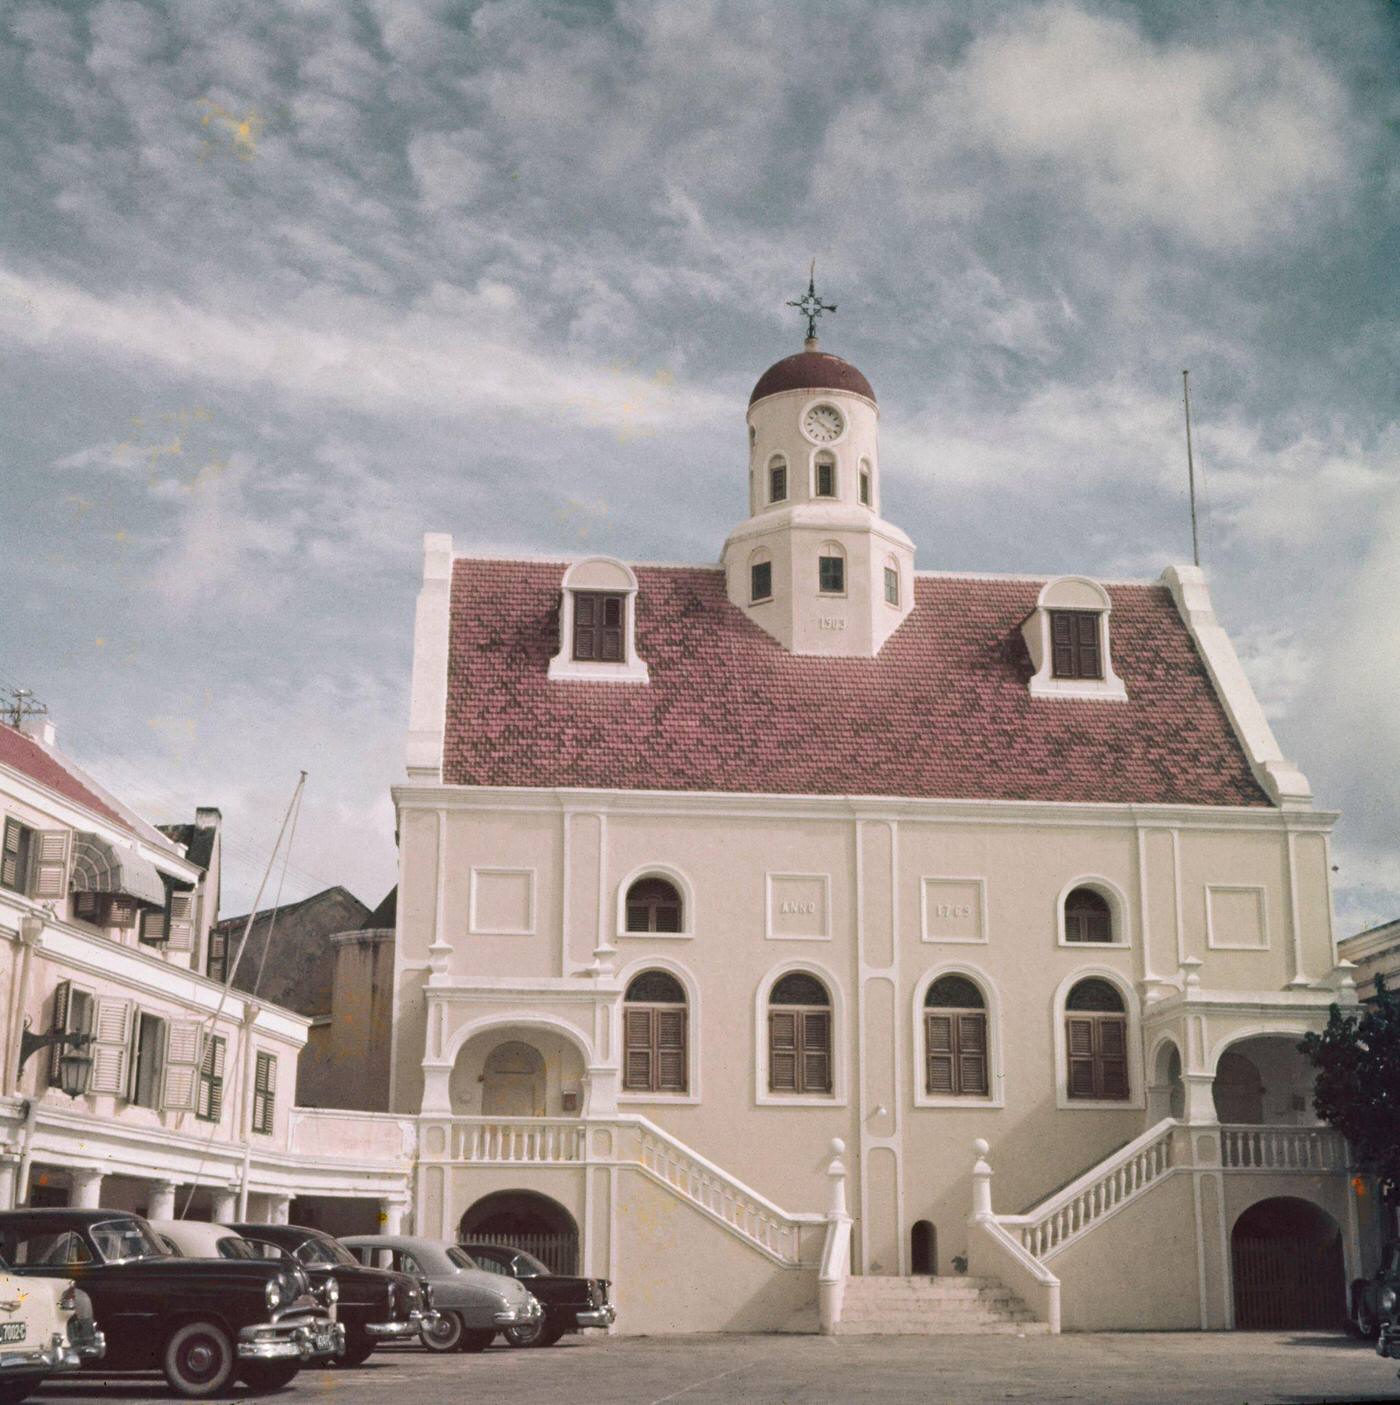 Cars parked outside a Dutch colonial building in Willemstad, capital city of the island of Curaçao, part of the Kingdom of the Netherlands in the southern Caribbean Sea, 1955.